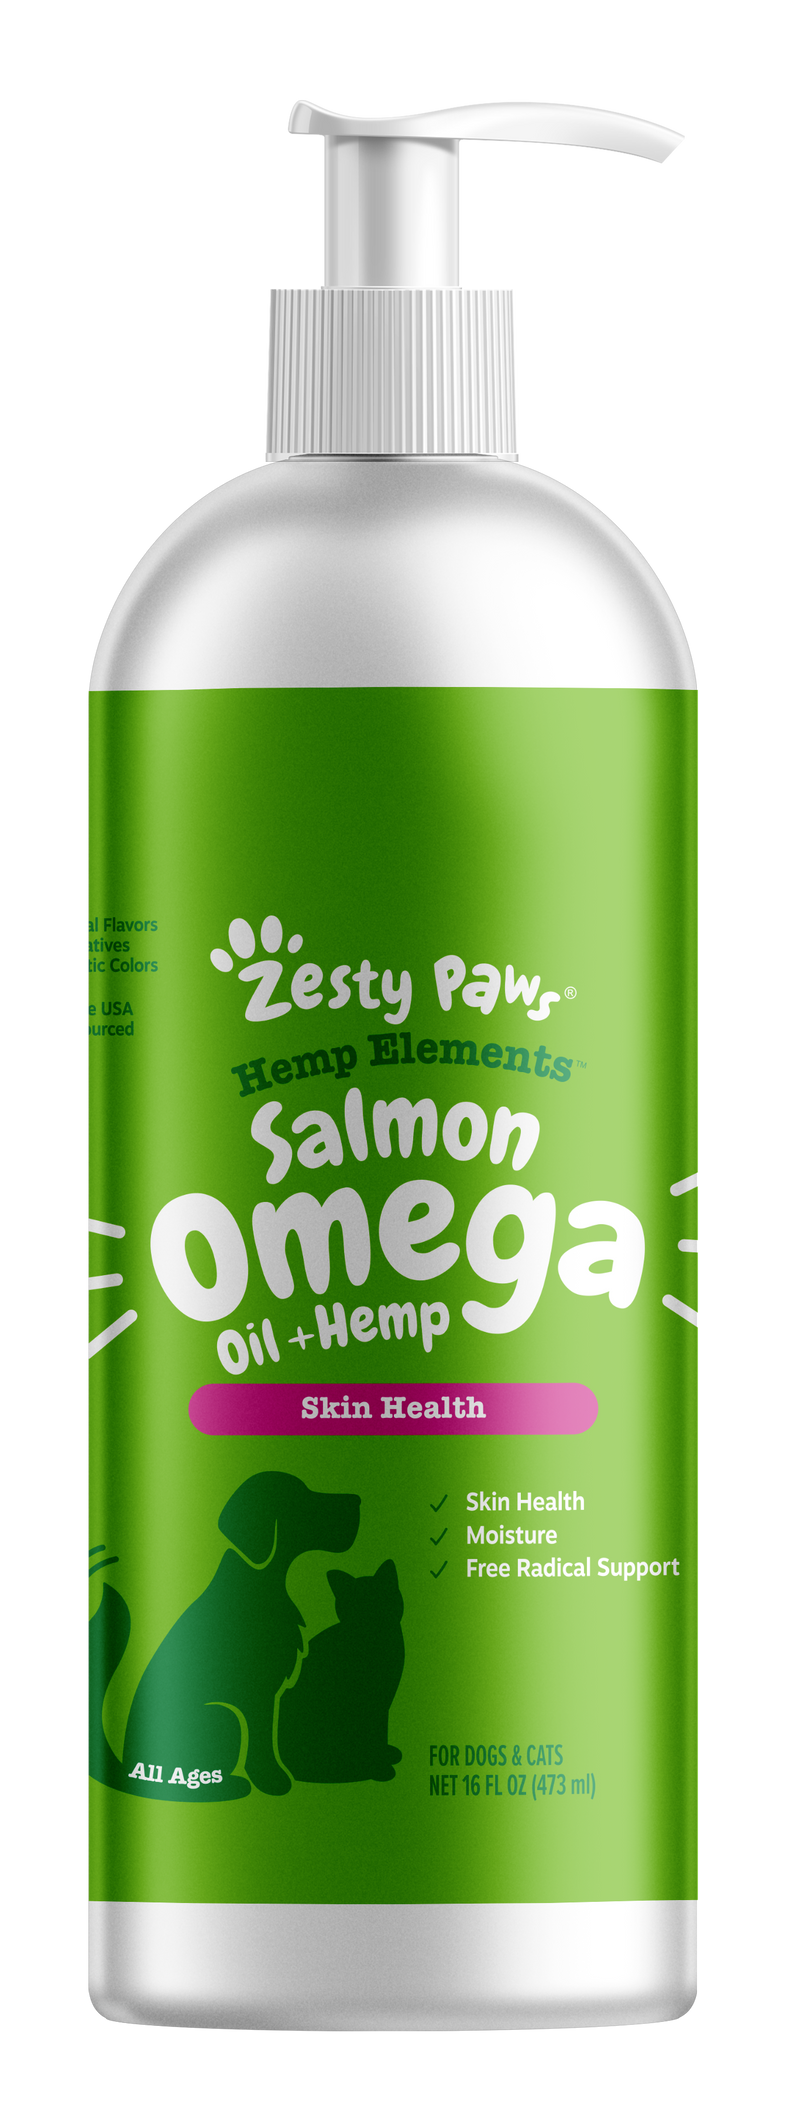 Hemp Elements™ Salmon Omega Oil + Hemp for Dogs and Cats